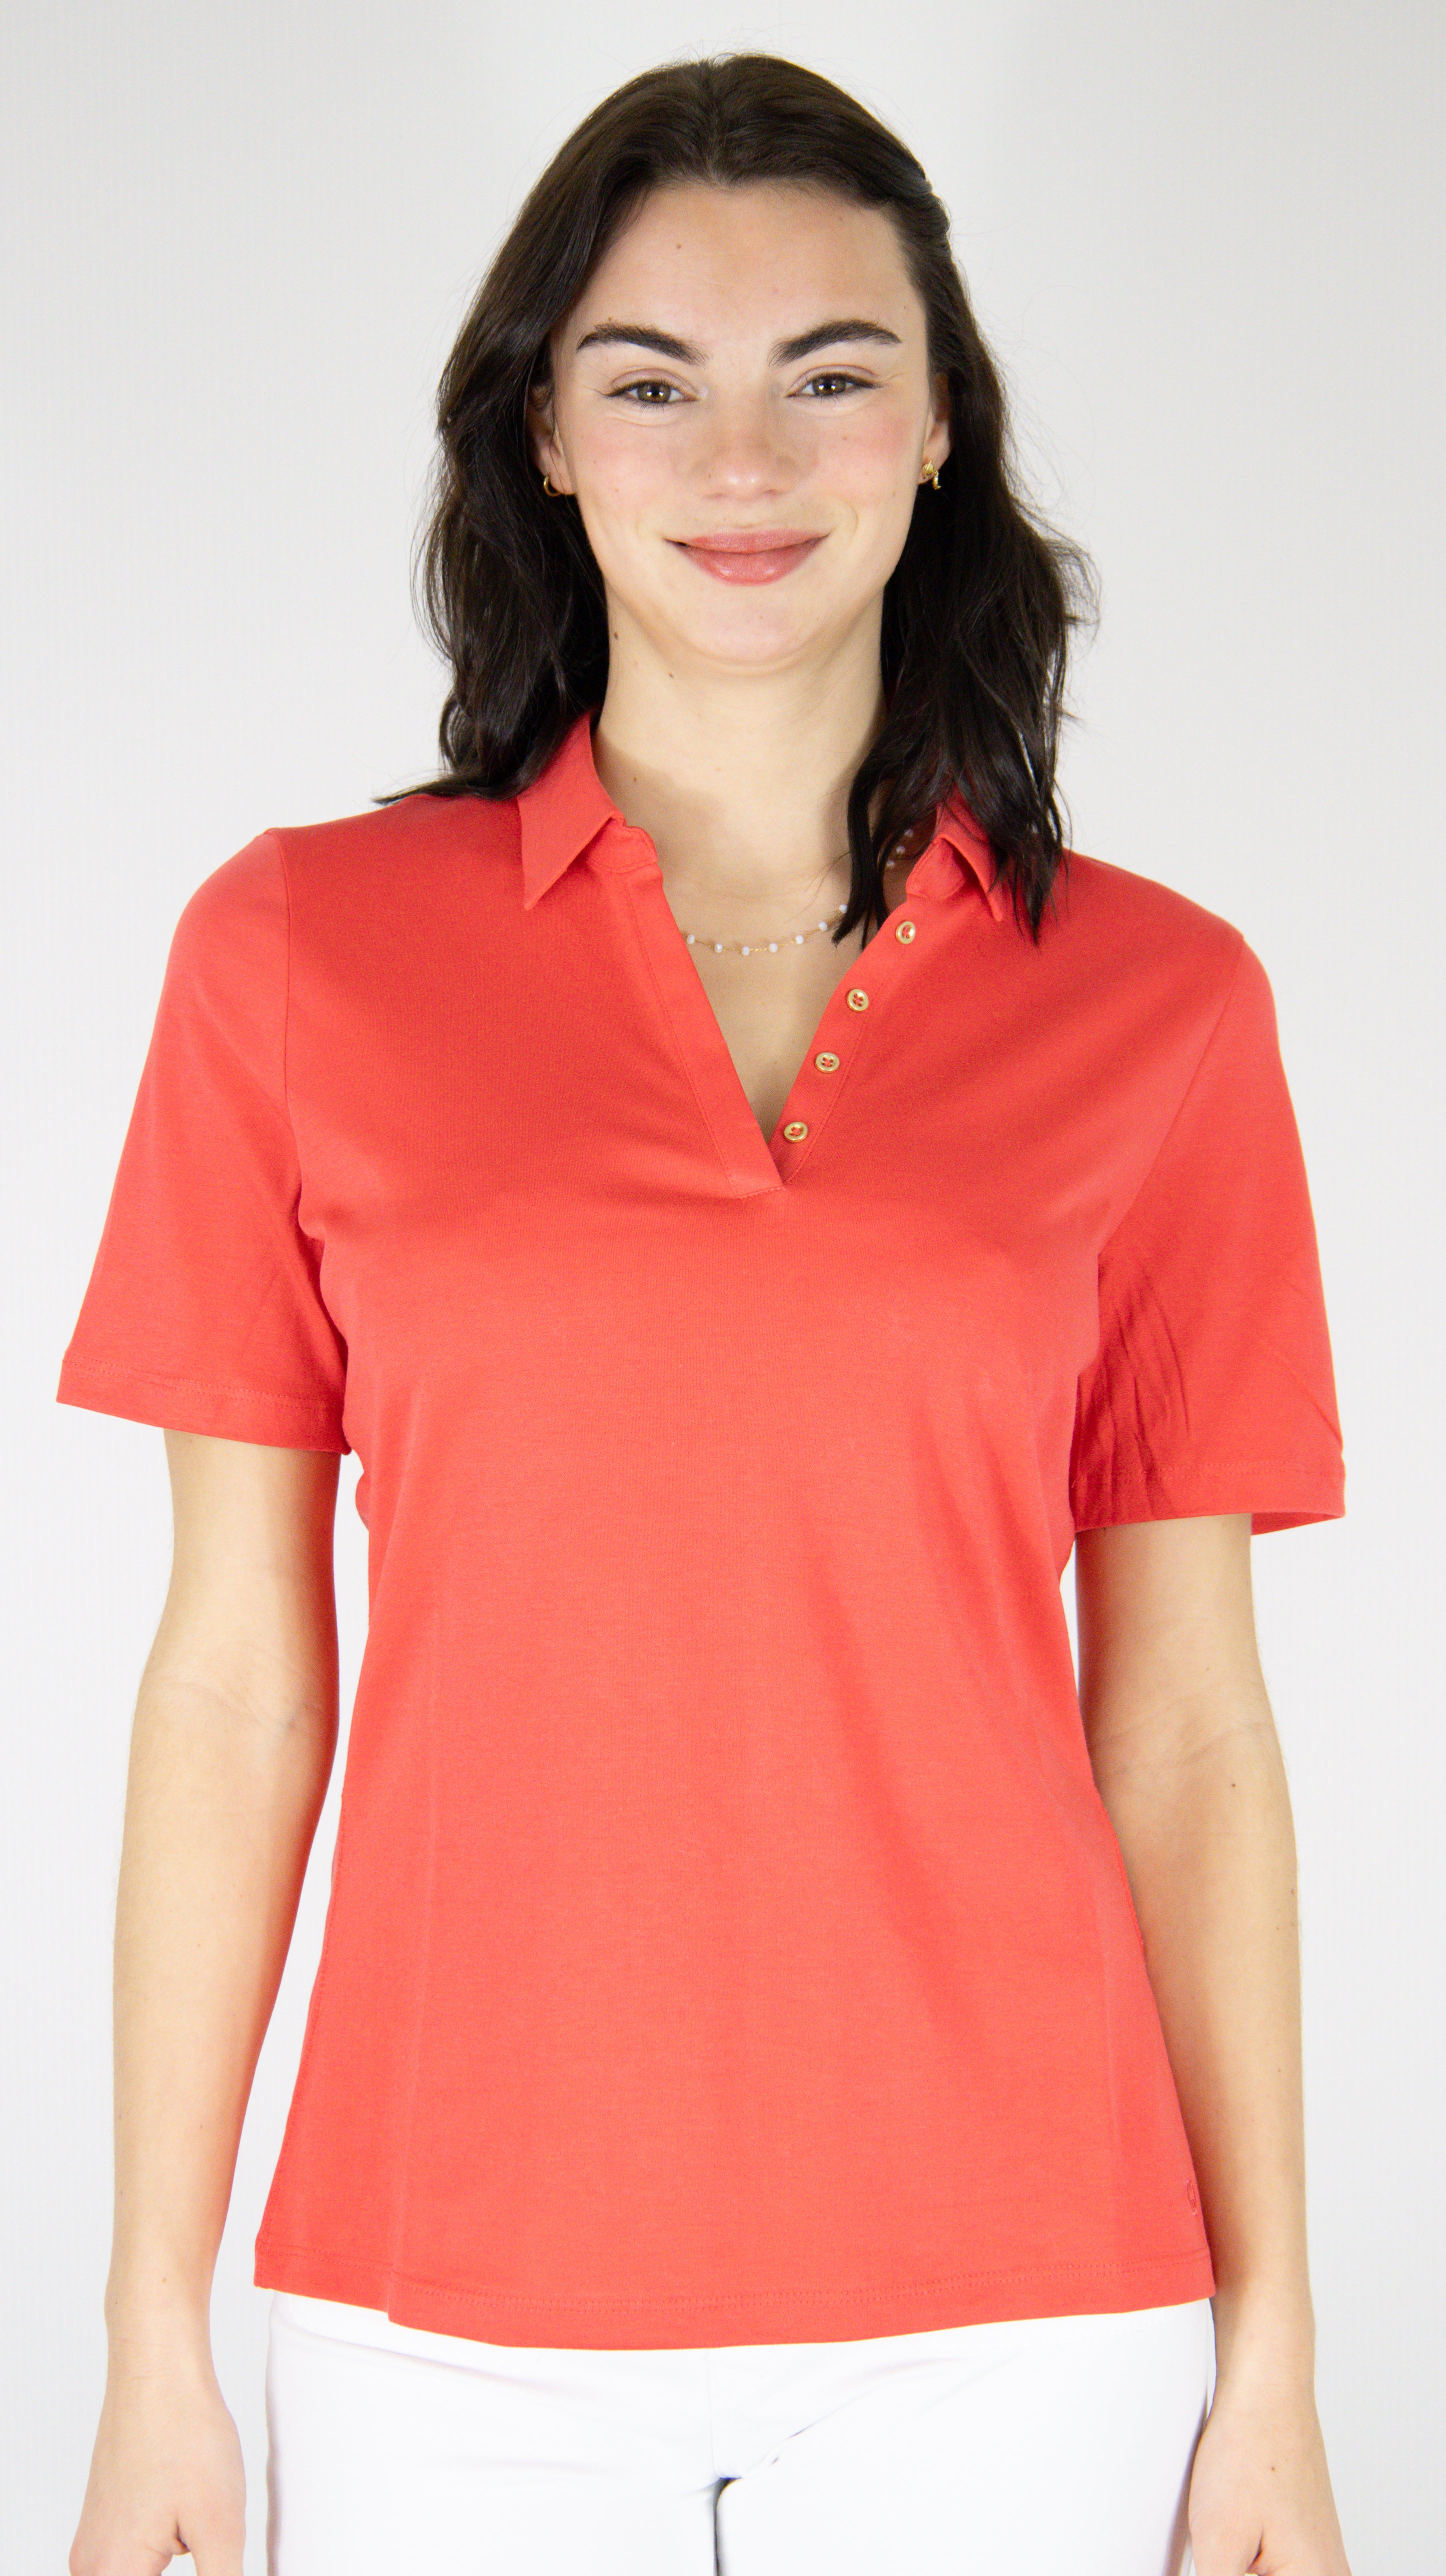 TEE SHIRT POLO MANCHES COURTES GERRY WEBER 977052 CORAIL#color_60140/corail